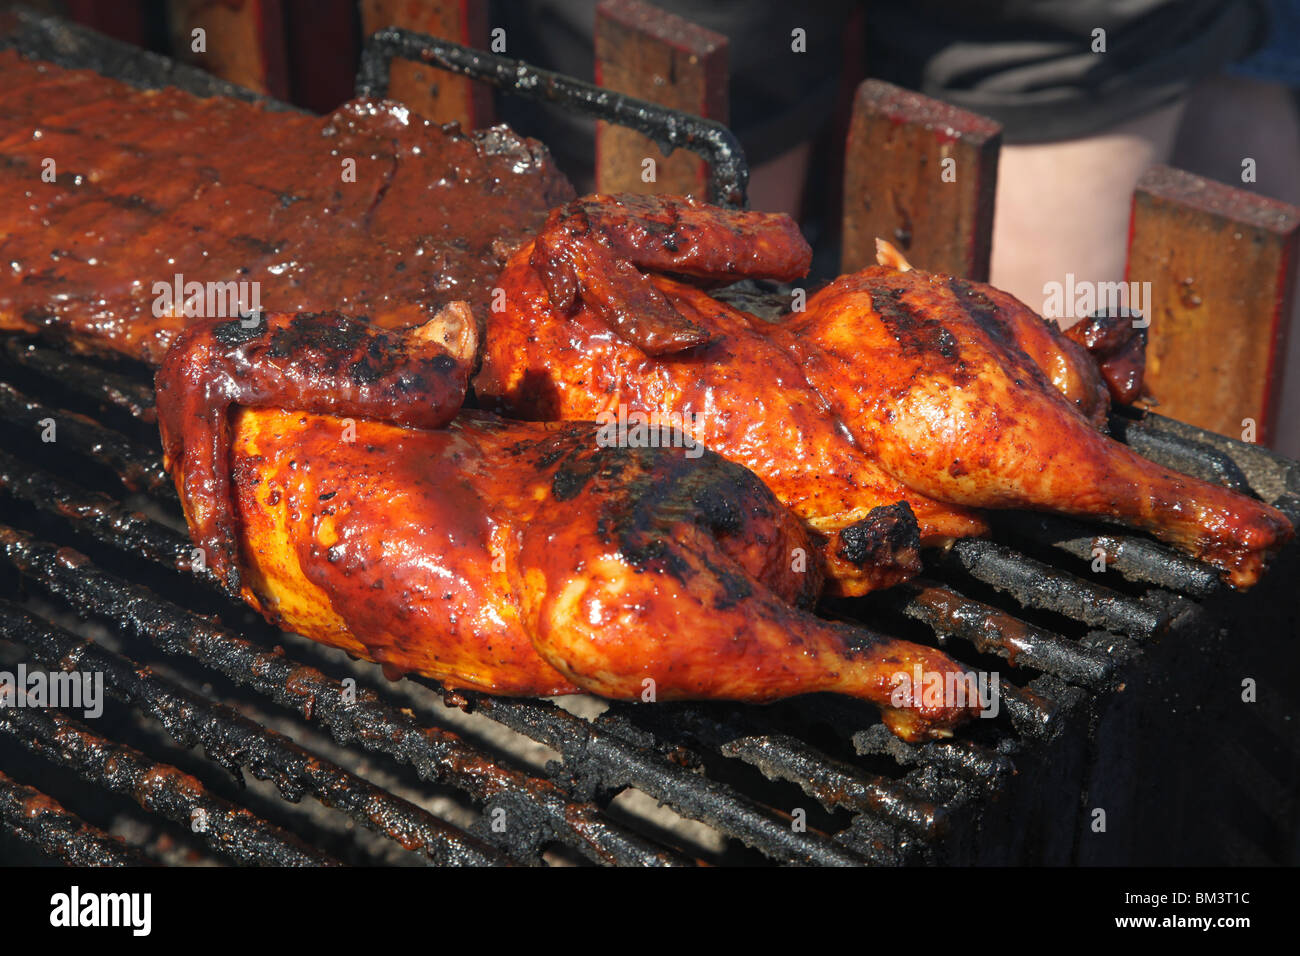 chicken being barbecued on grille Stock Photo